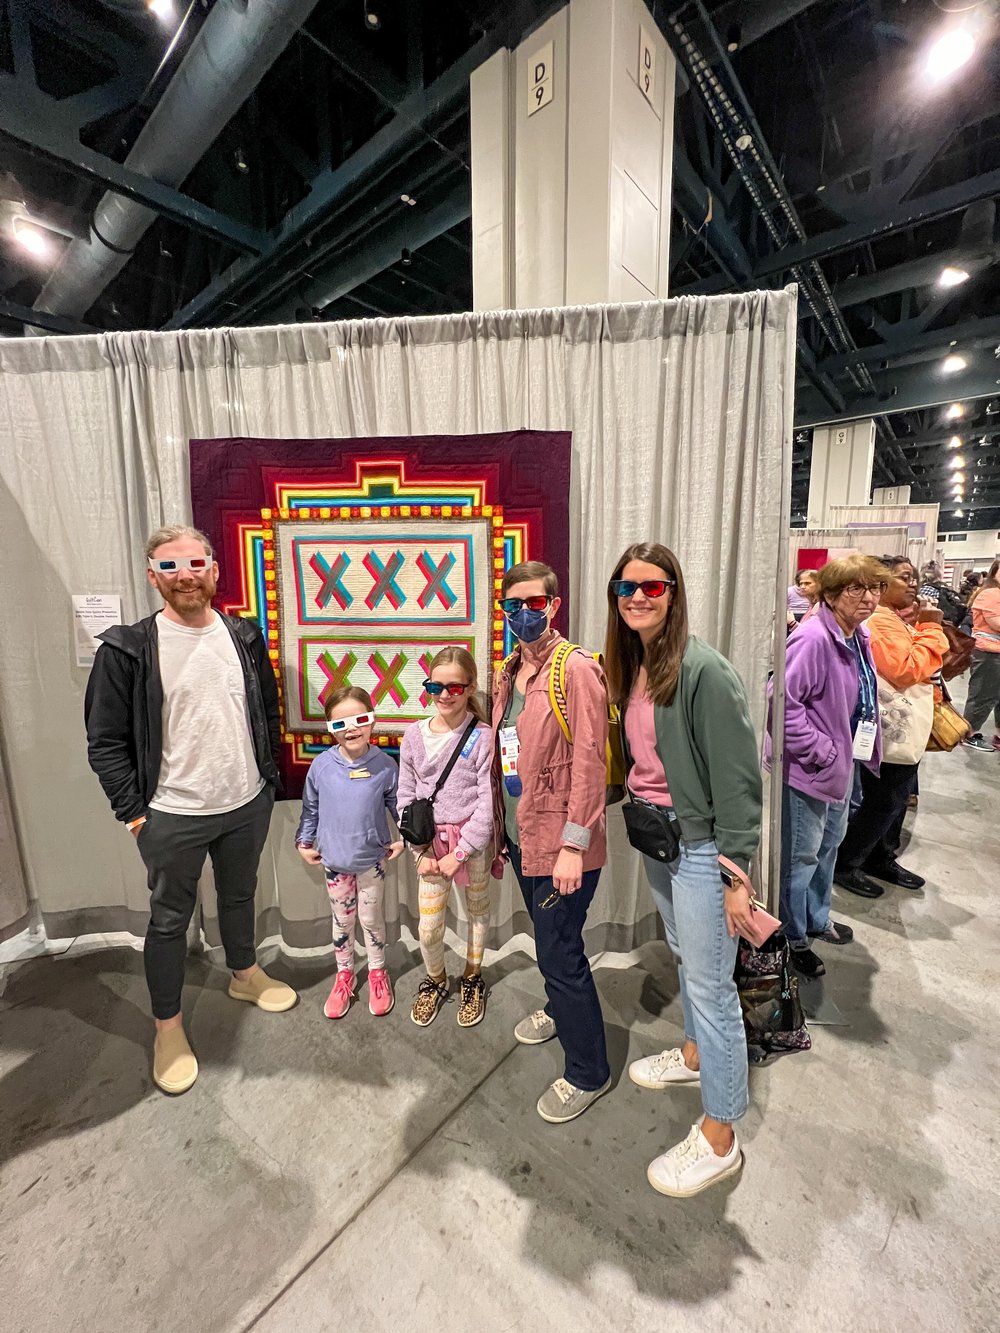 Checking out the quilt called "Debbie Does Quilts Presents: A 3D, Triple-X, Double Feature" by Debra Milkovich